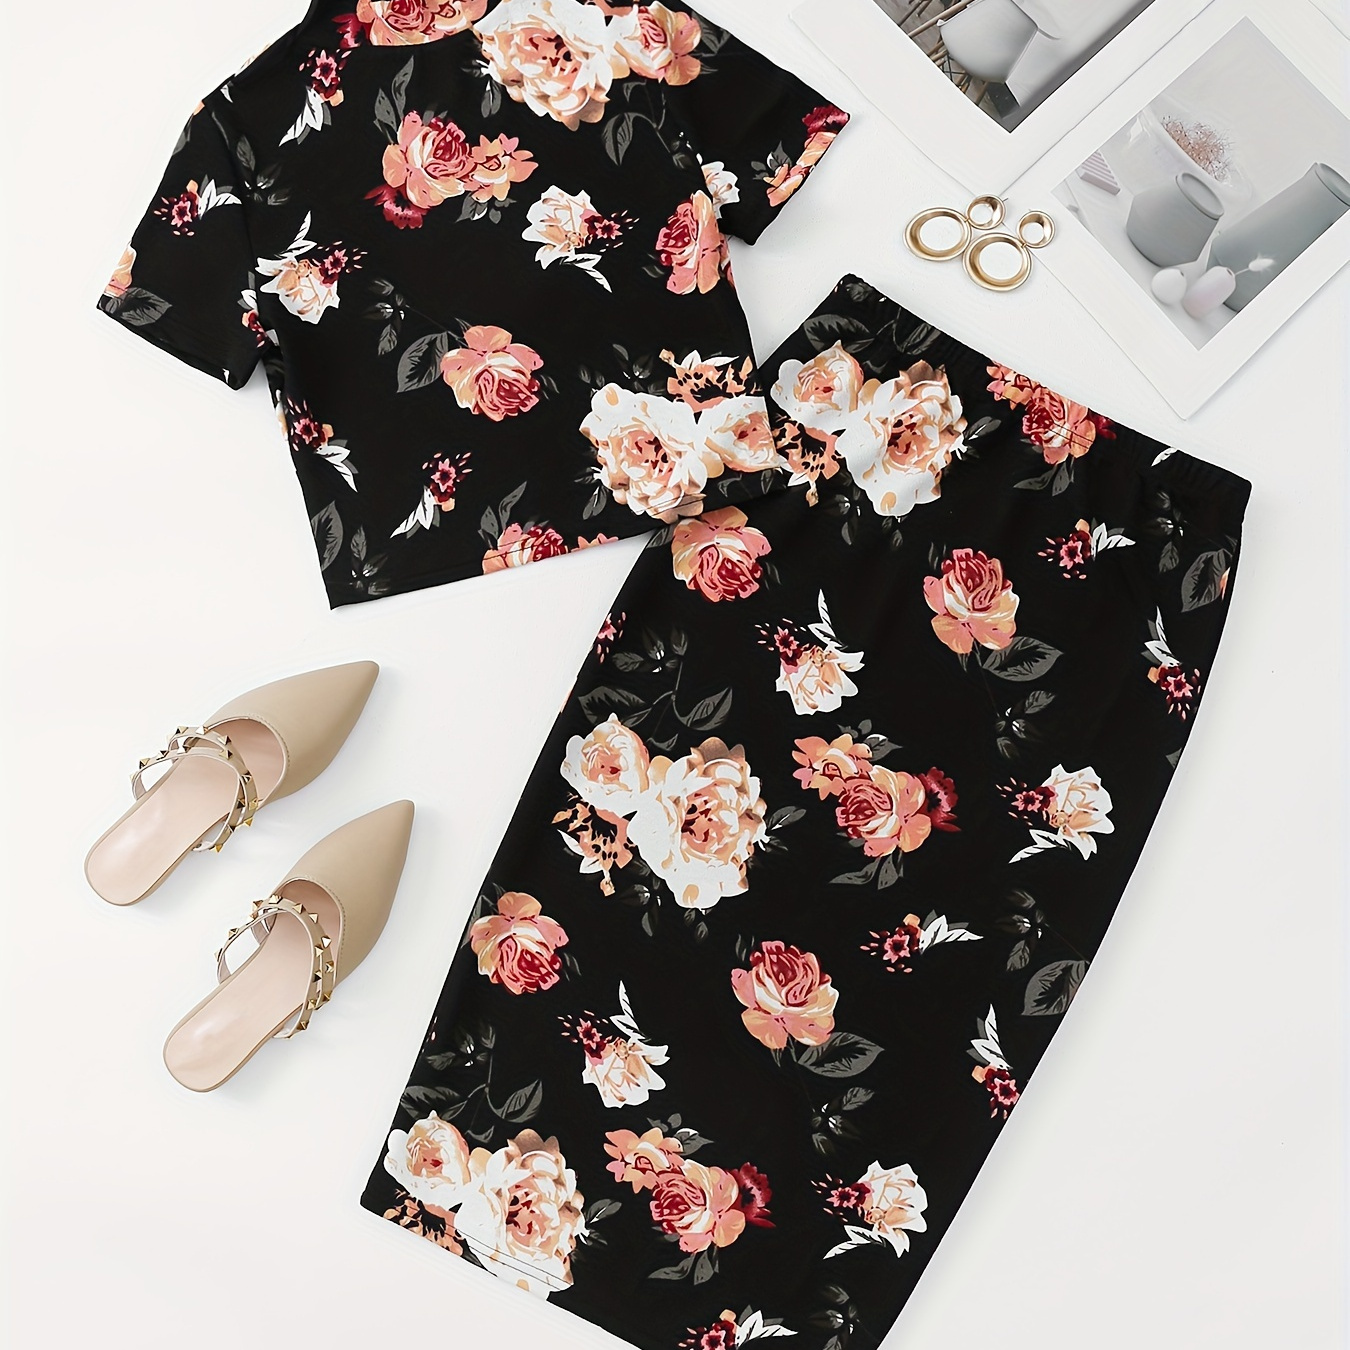 

Floral Print Two-piece Set, Elegant Mock Short Sleeve Crop T-shirt & Bodycon Midi Skirt Outfits, Women's Clothing